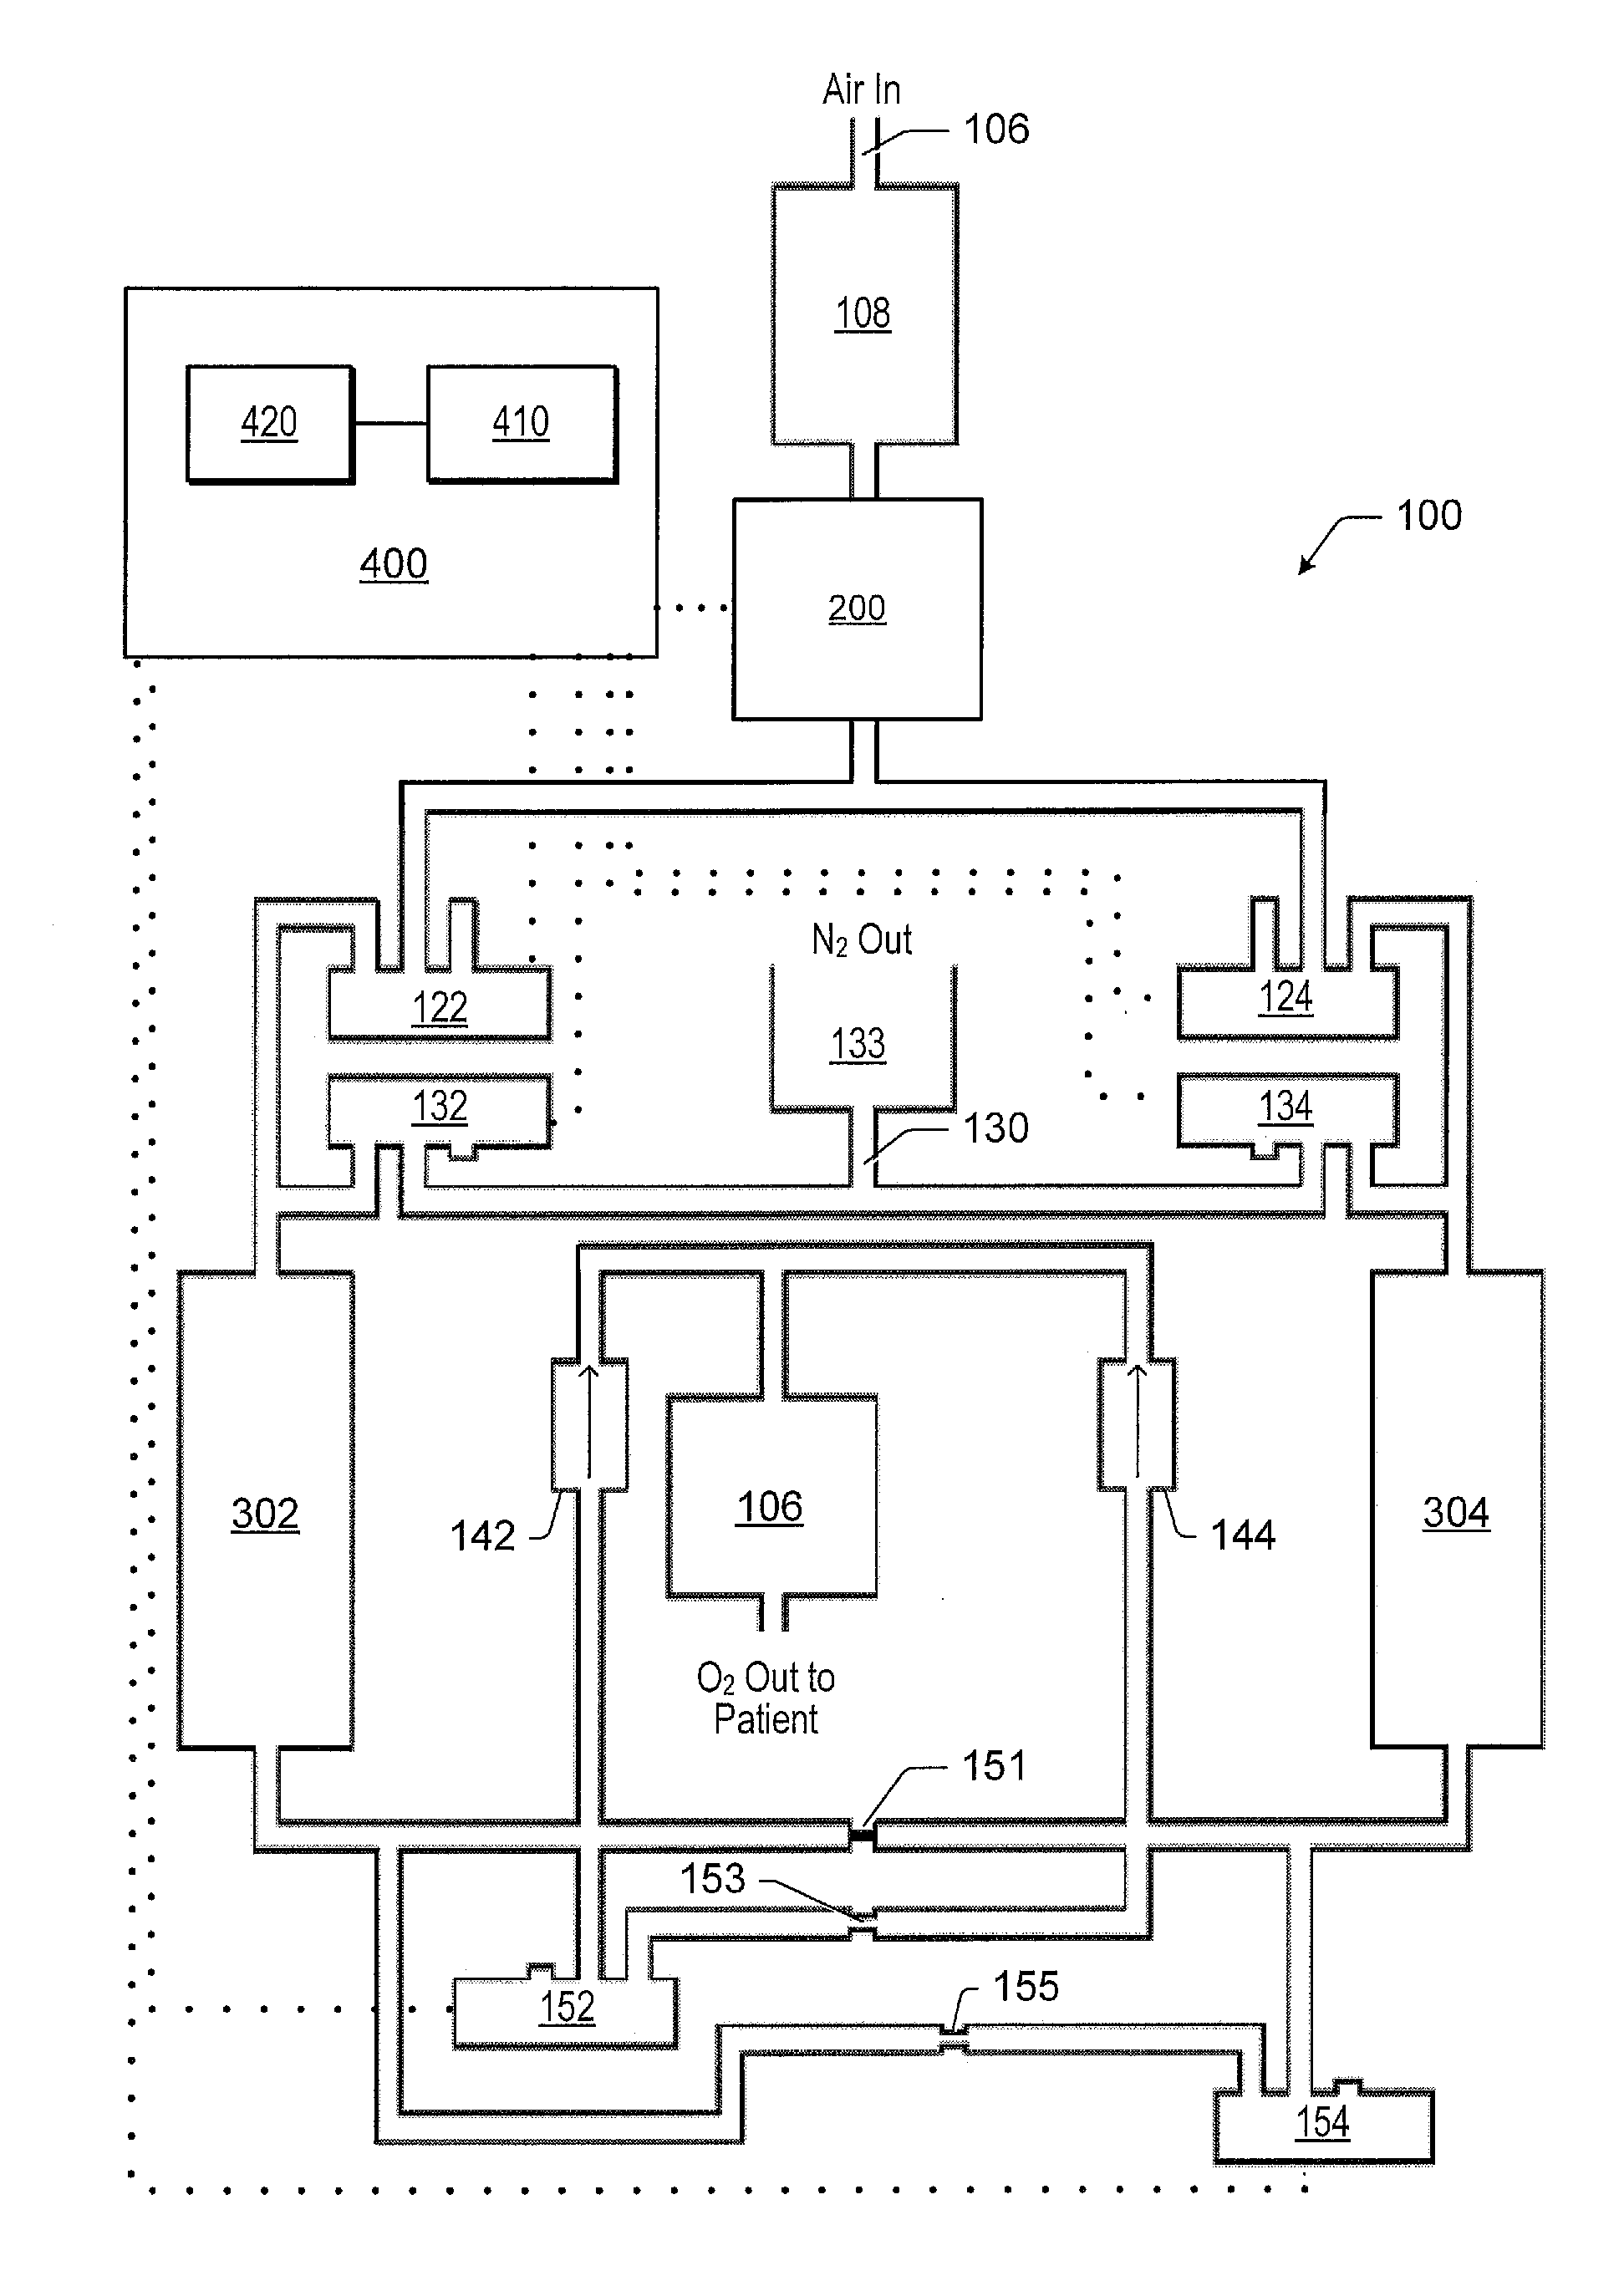 Oxygen concentrator apparatus configured for high altitude use